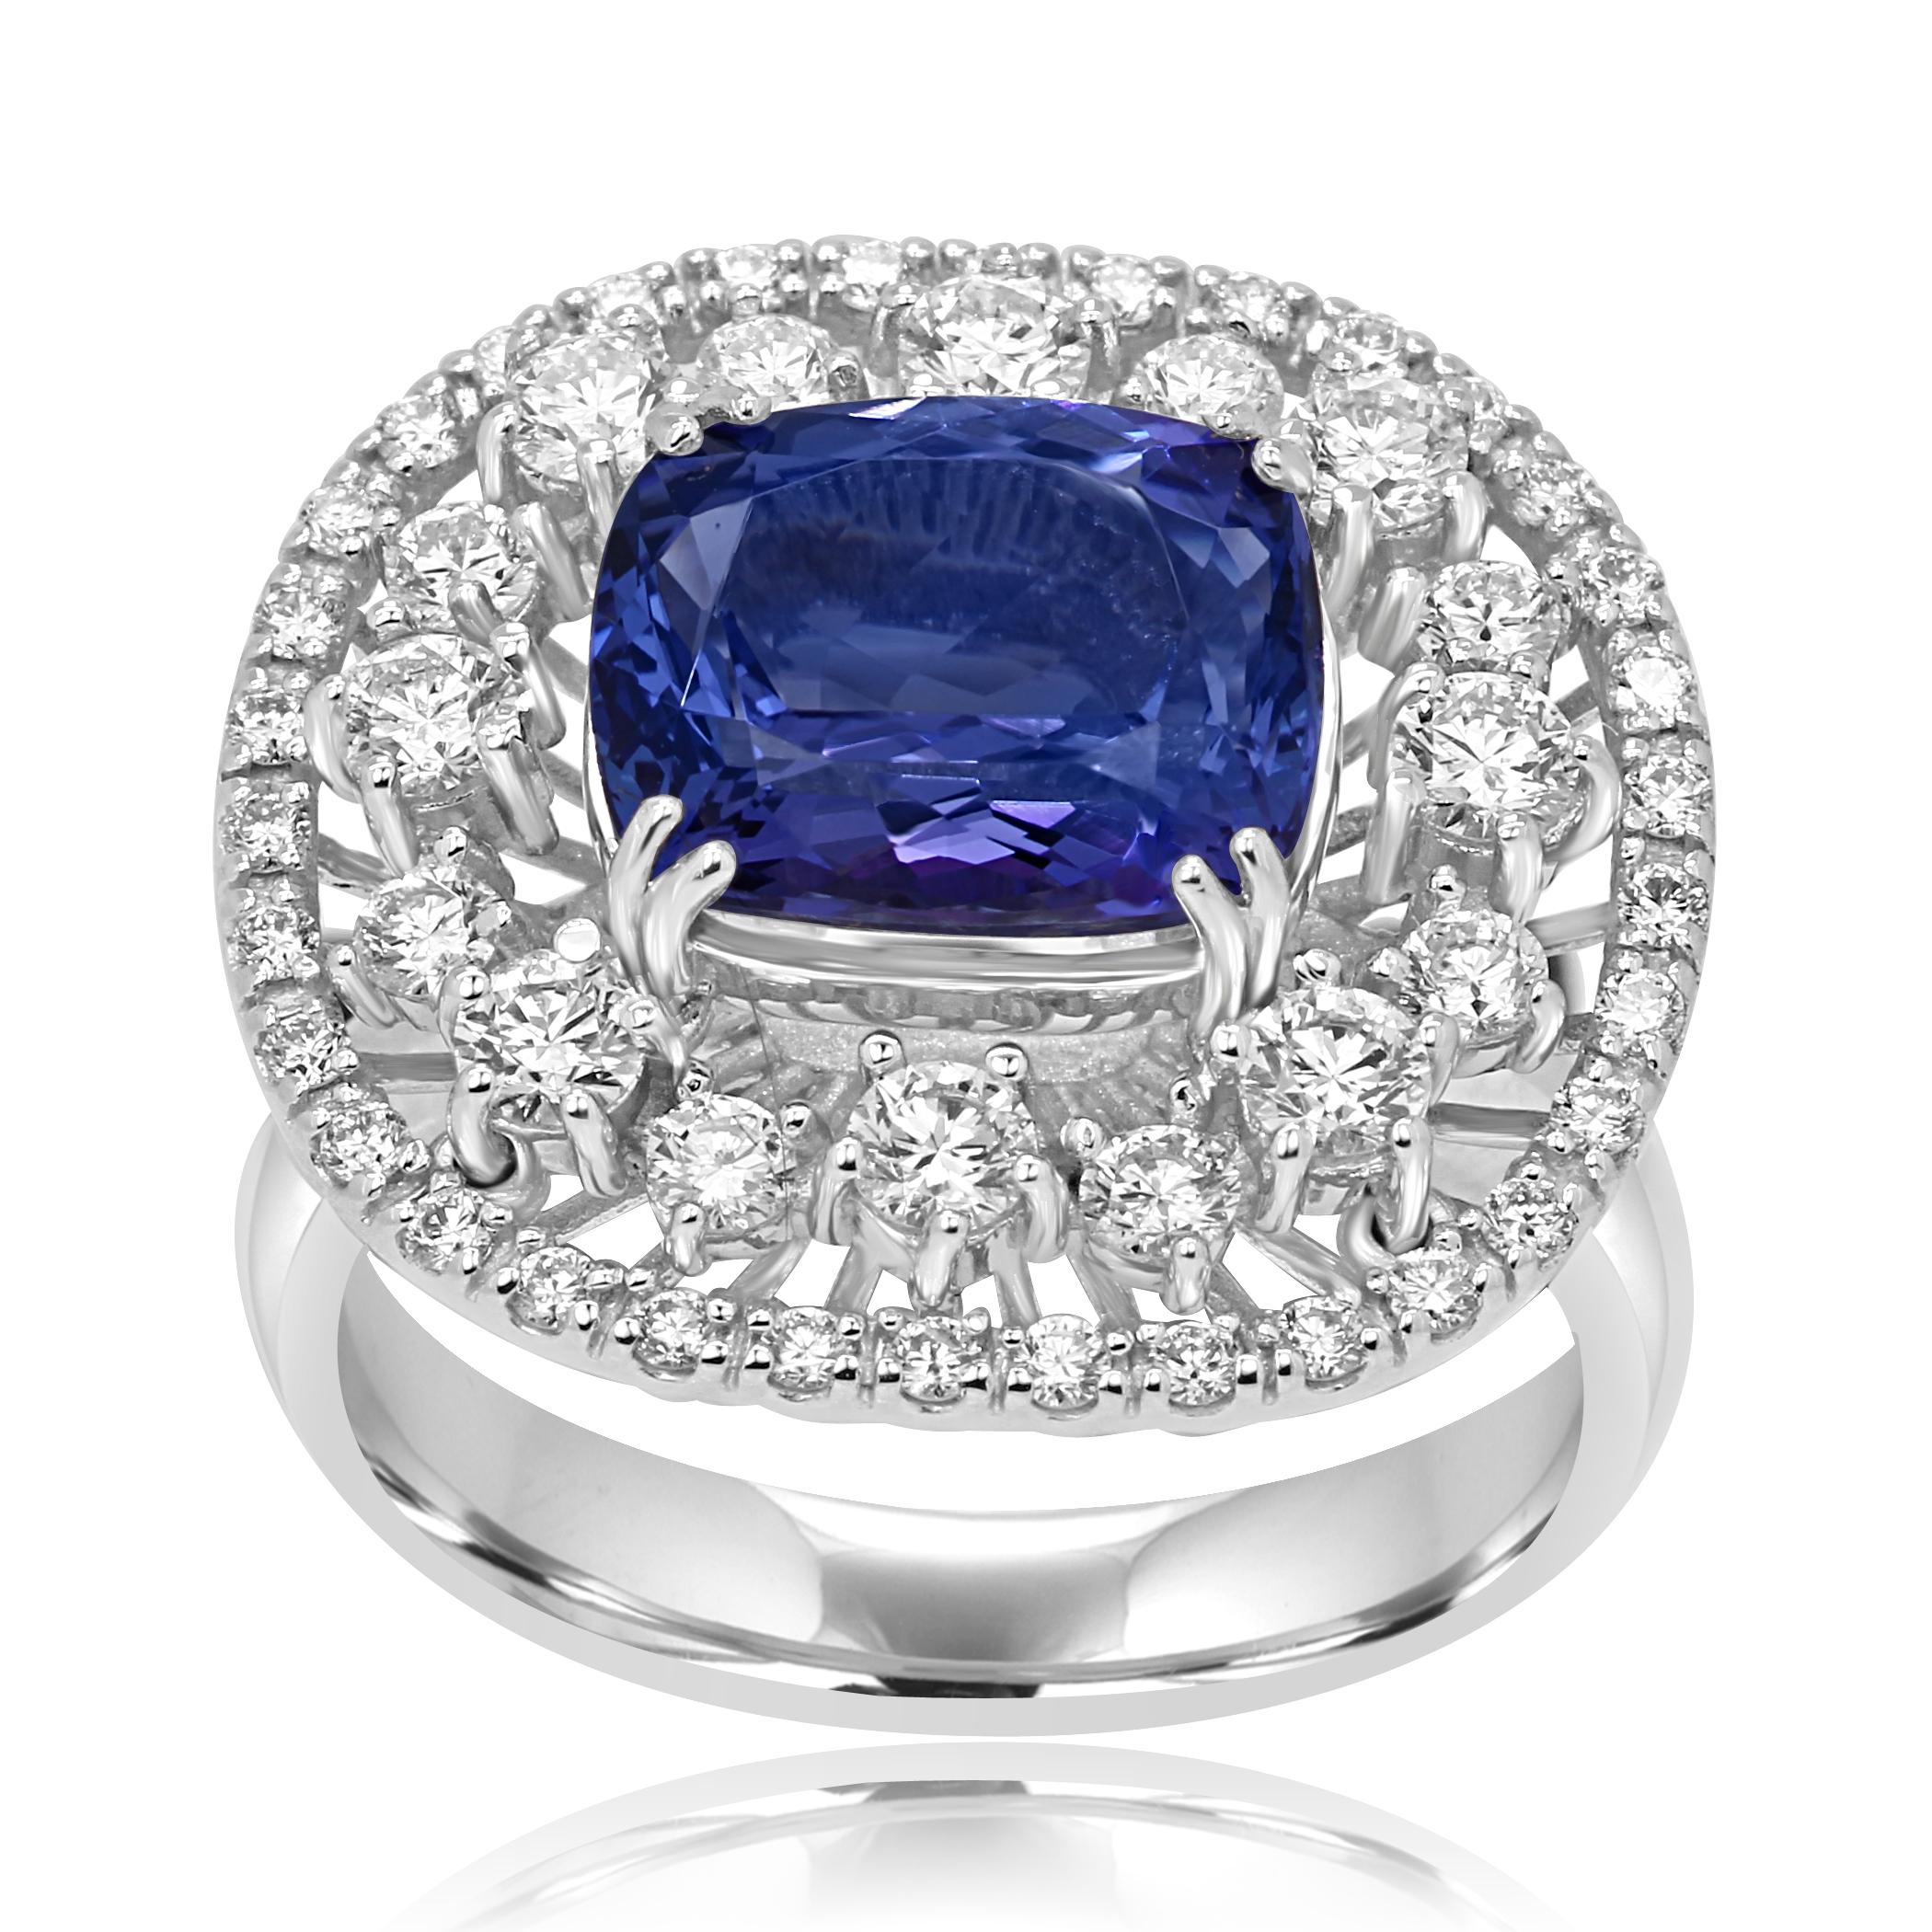 Tanzanite Cushion 3.23 Carat  encircled in a Double Halo of White Round Diamonds 1.02 Carat in a Stunning 14K White Gold Cocktail Fashion Ring with nice wire work on the gallery.

Style available in different price ranges. Prices are based on your